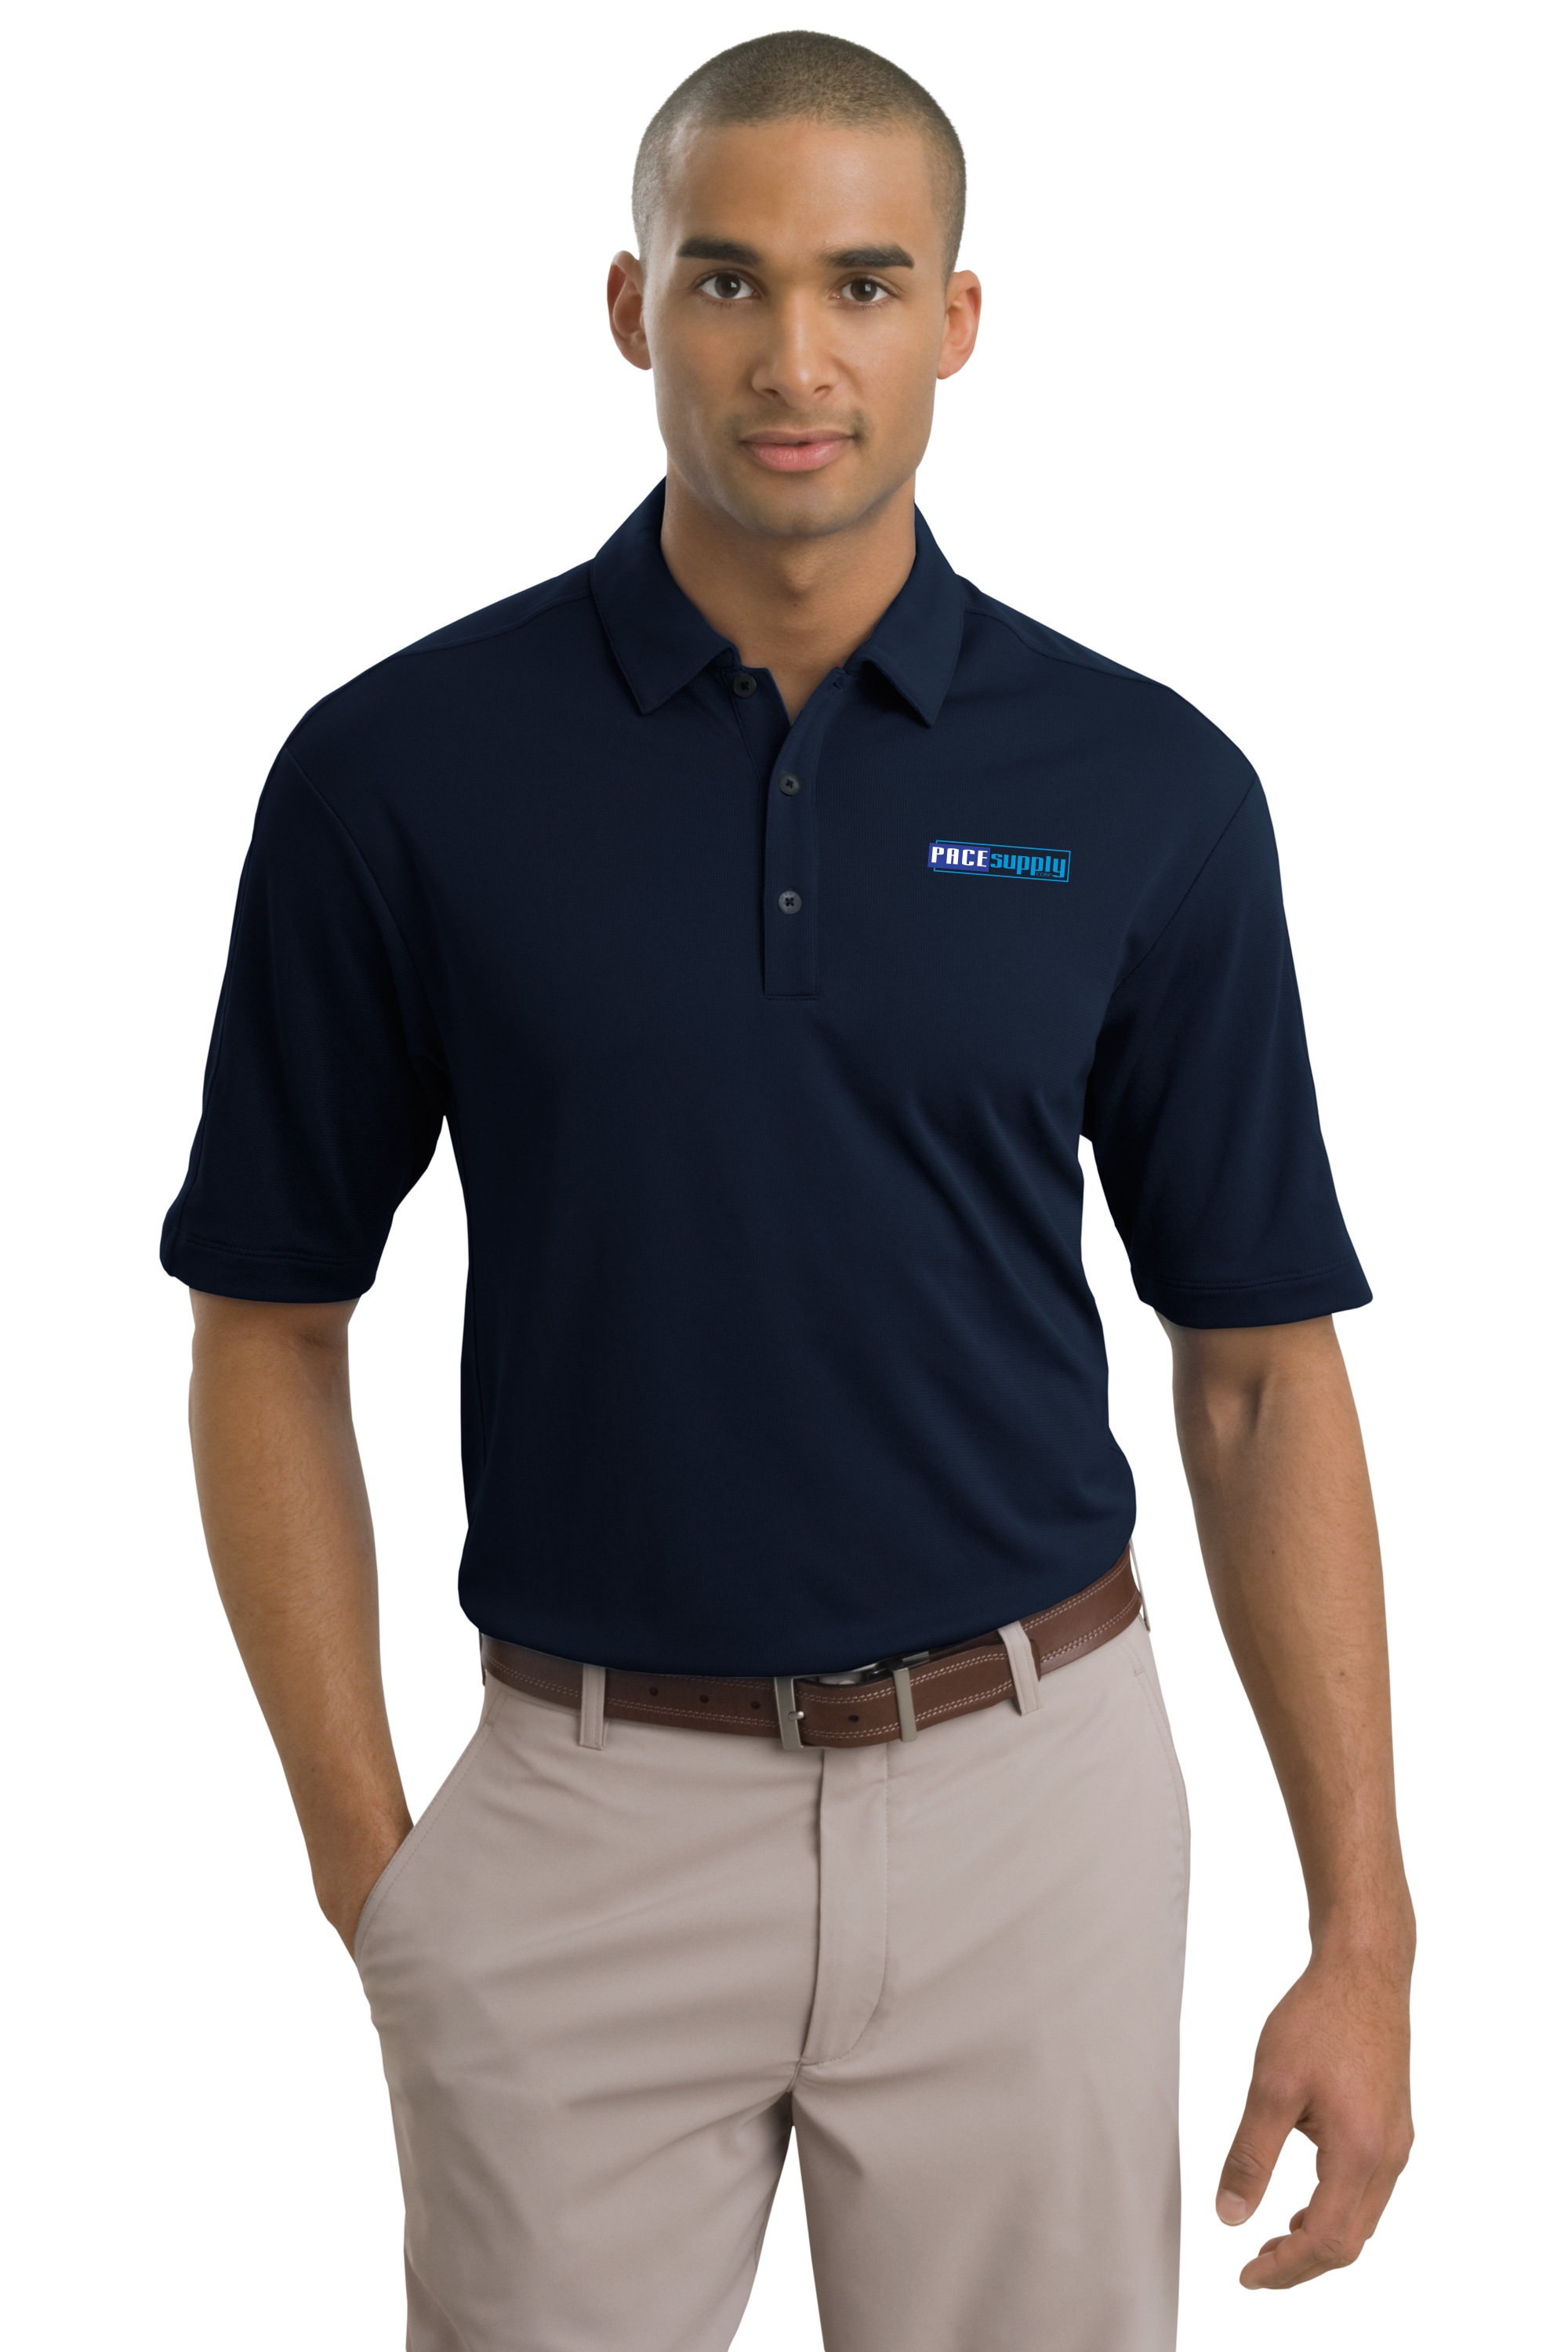 Business Attire Polo Shirt on Sale, UP ...